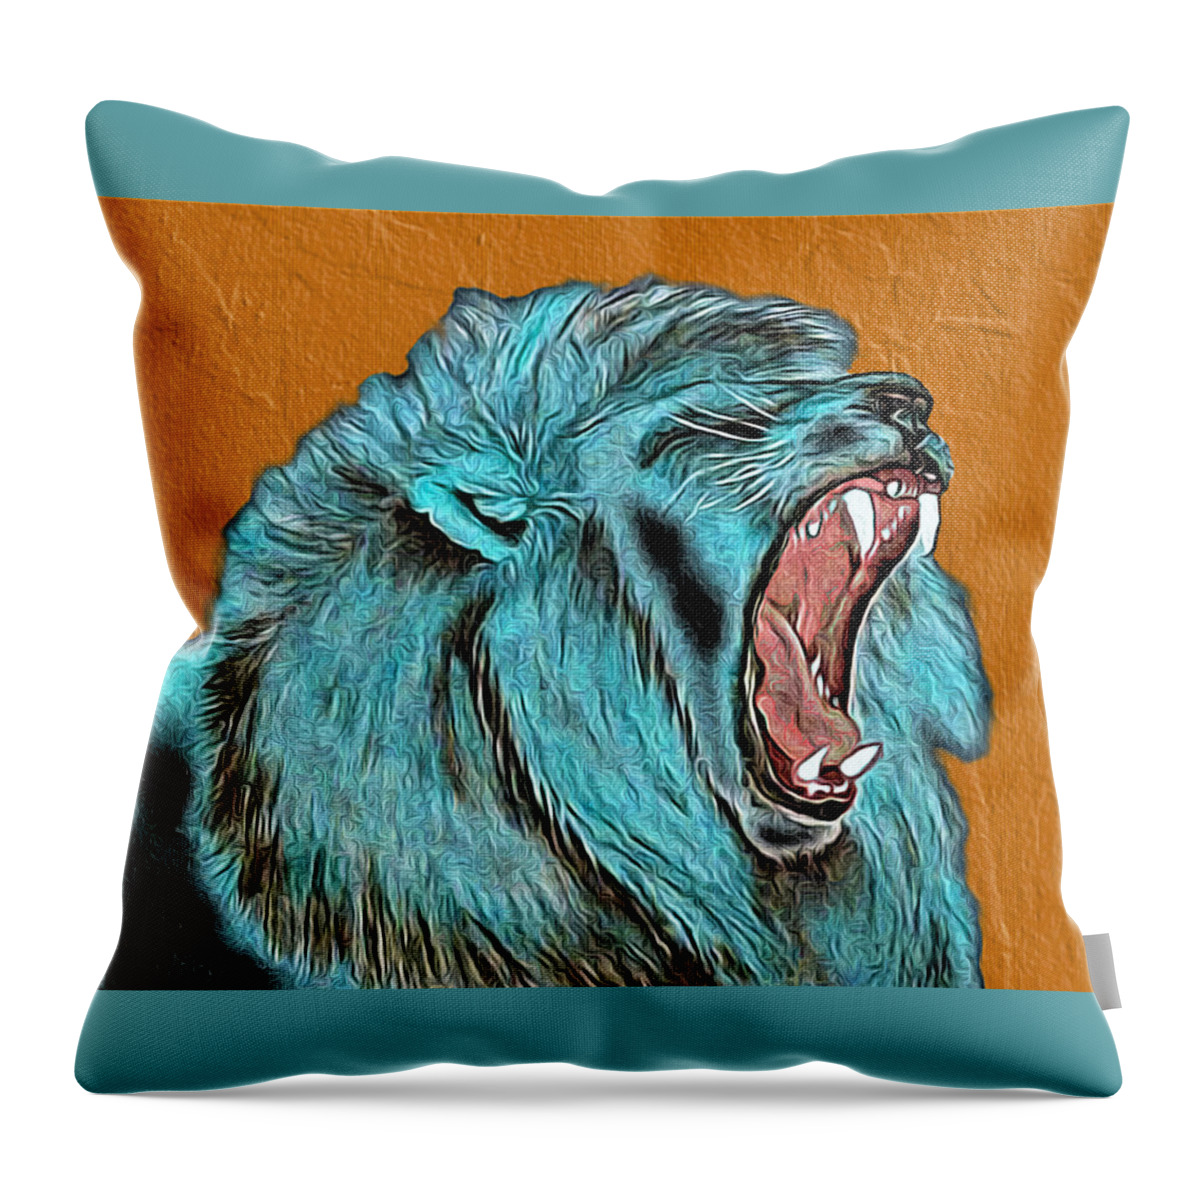 Abstract Throw Pillow featuring the mixed media Lion's Roar - Abstract by Ronald Mills